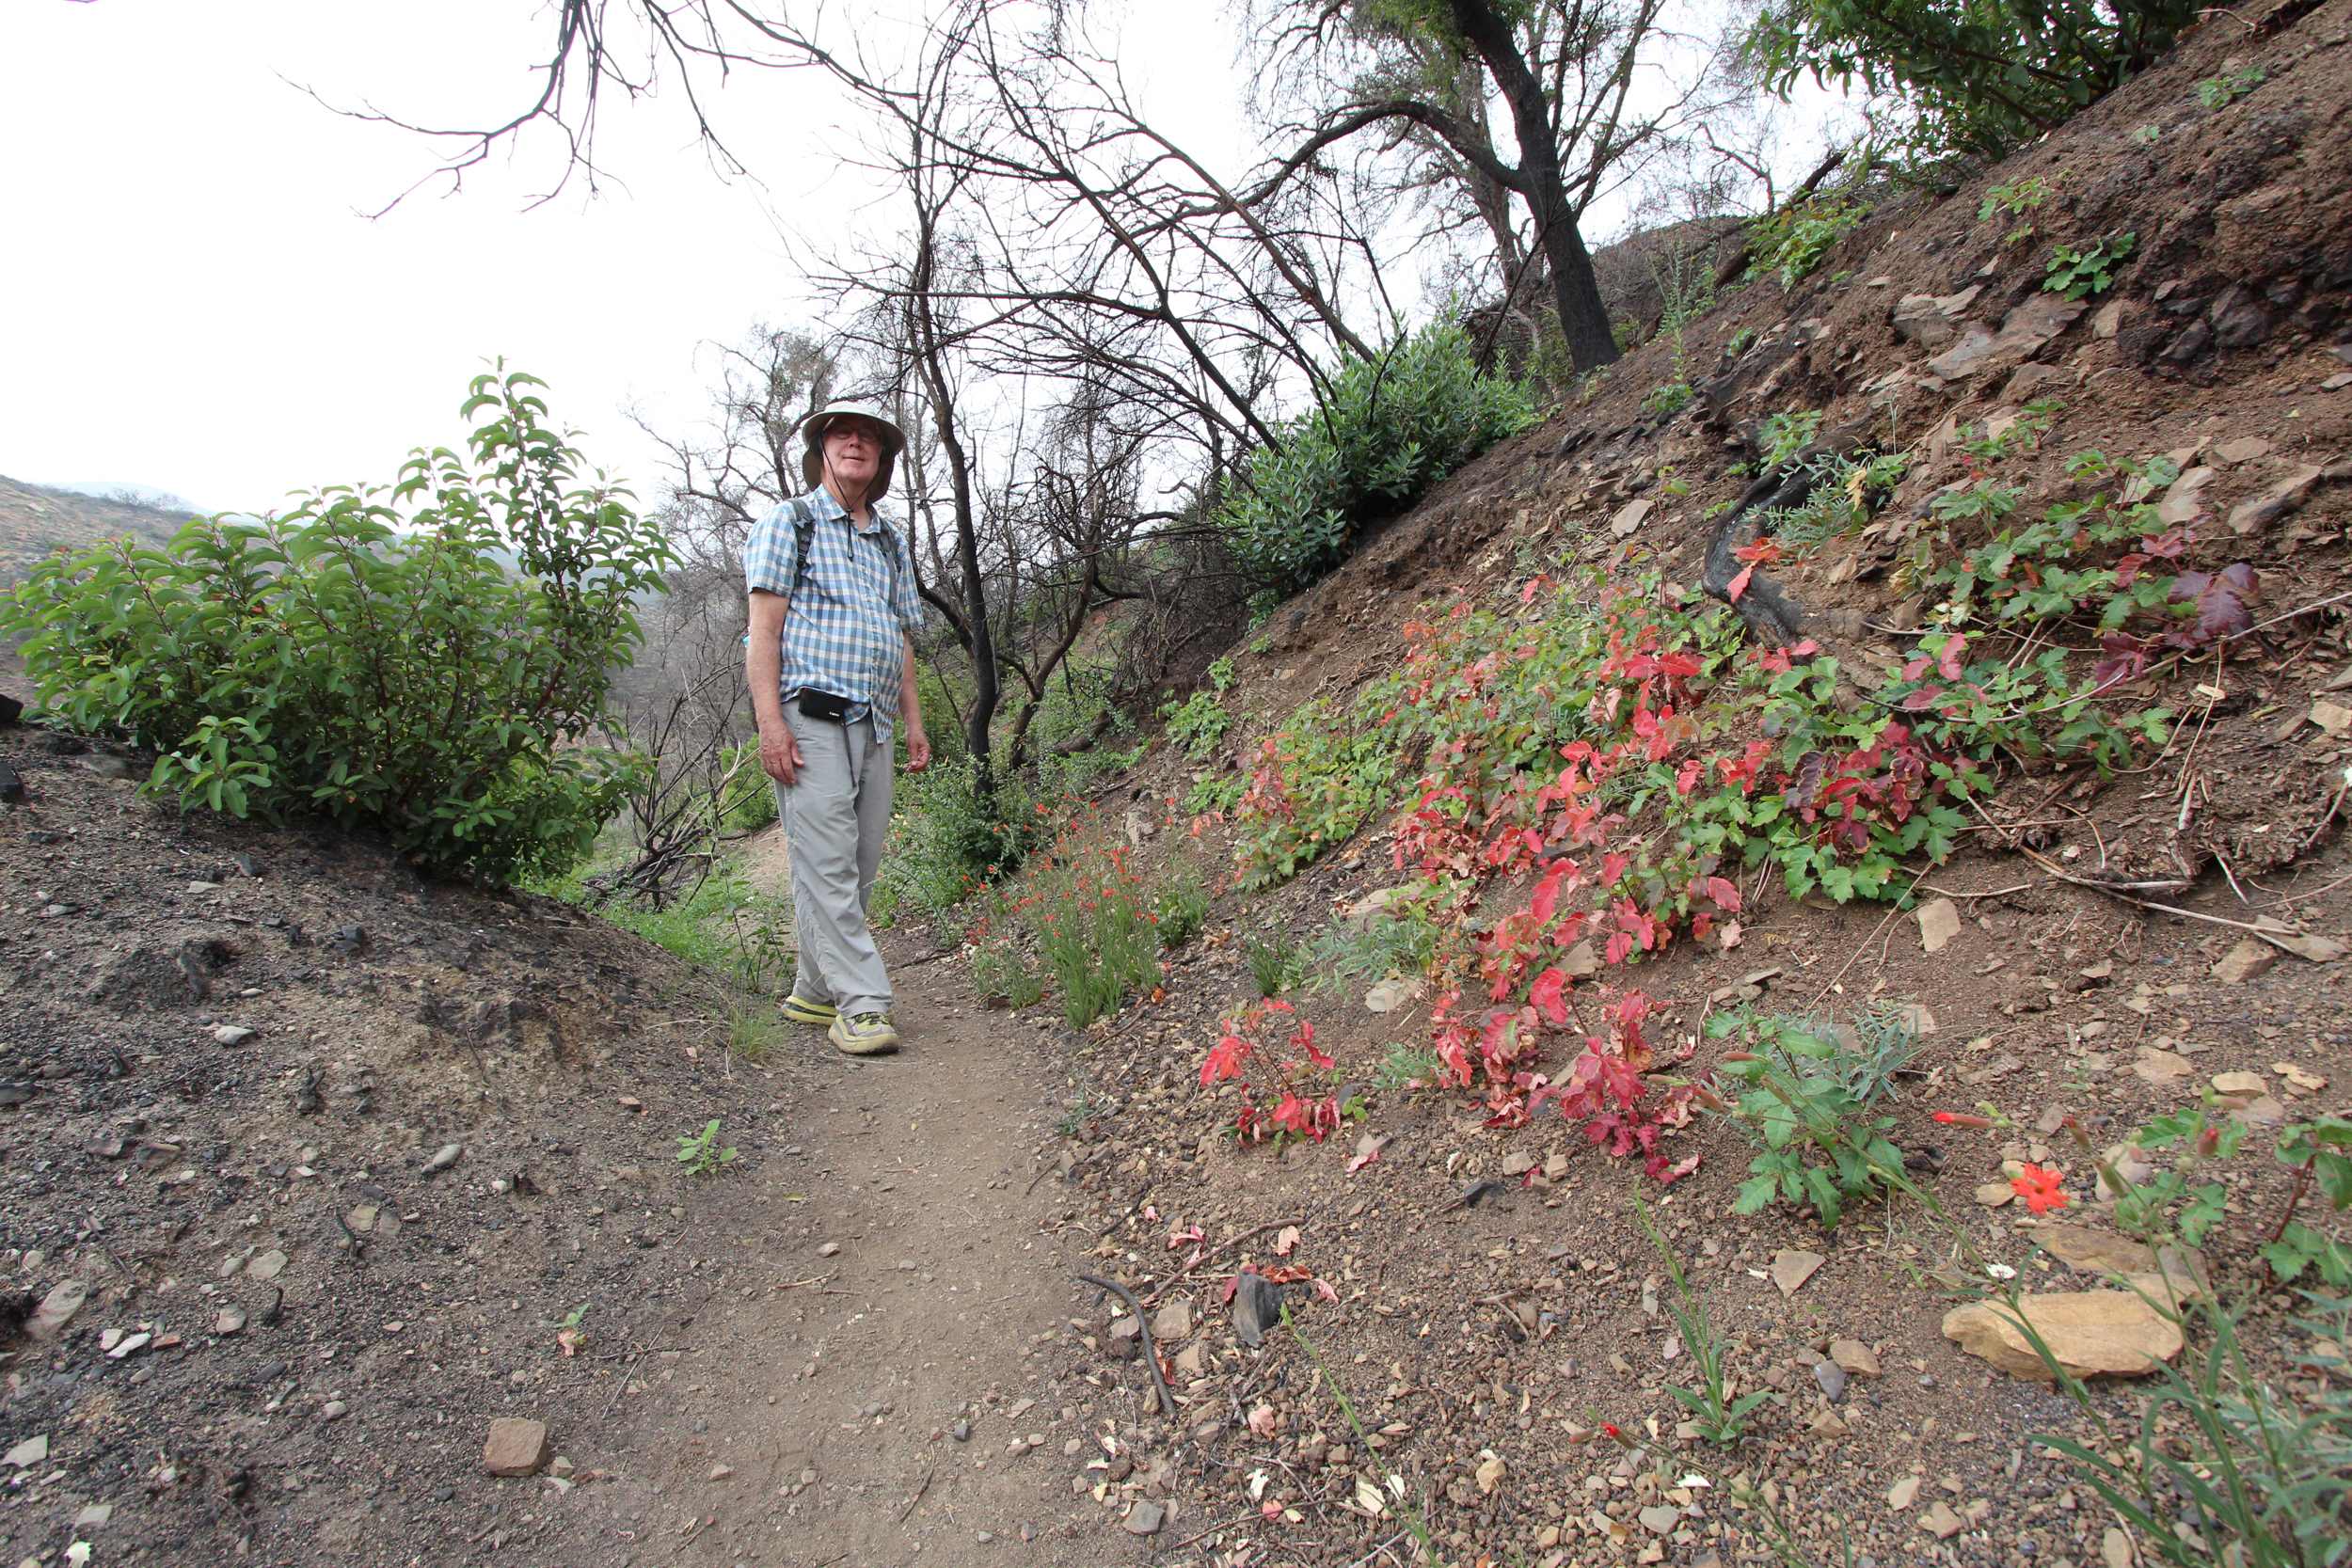 A hiker navigates a trail with sumac on one side and poison oak on the other.